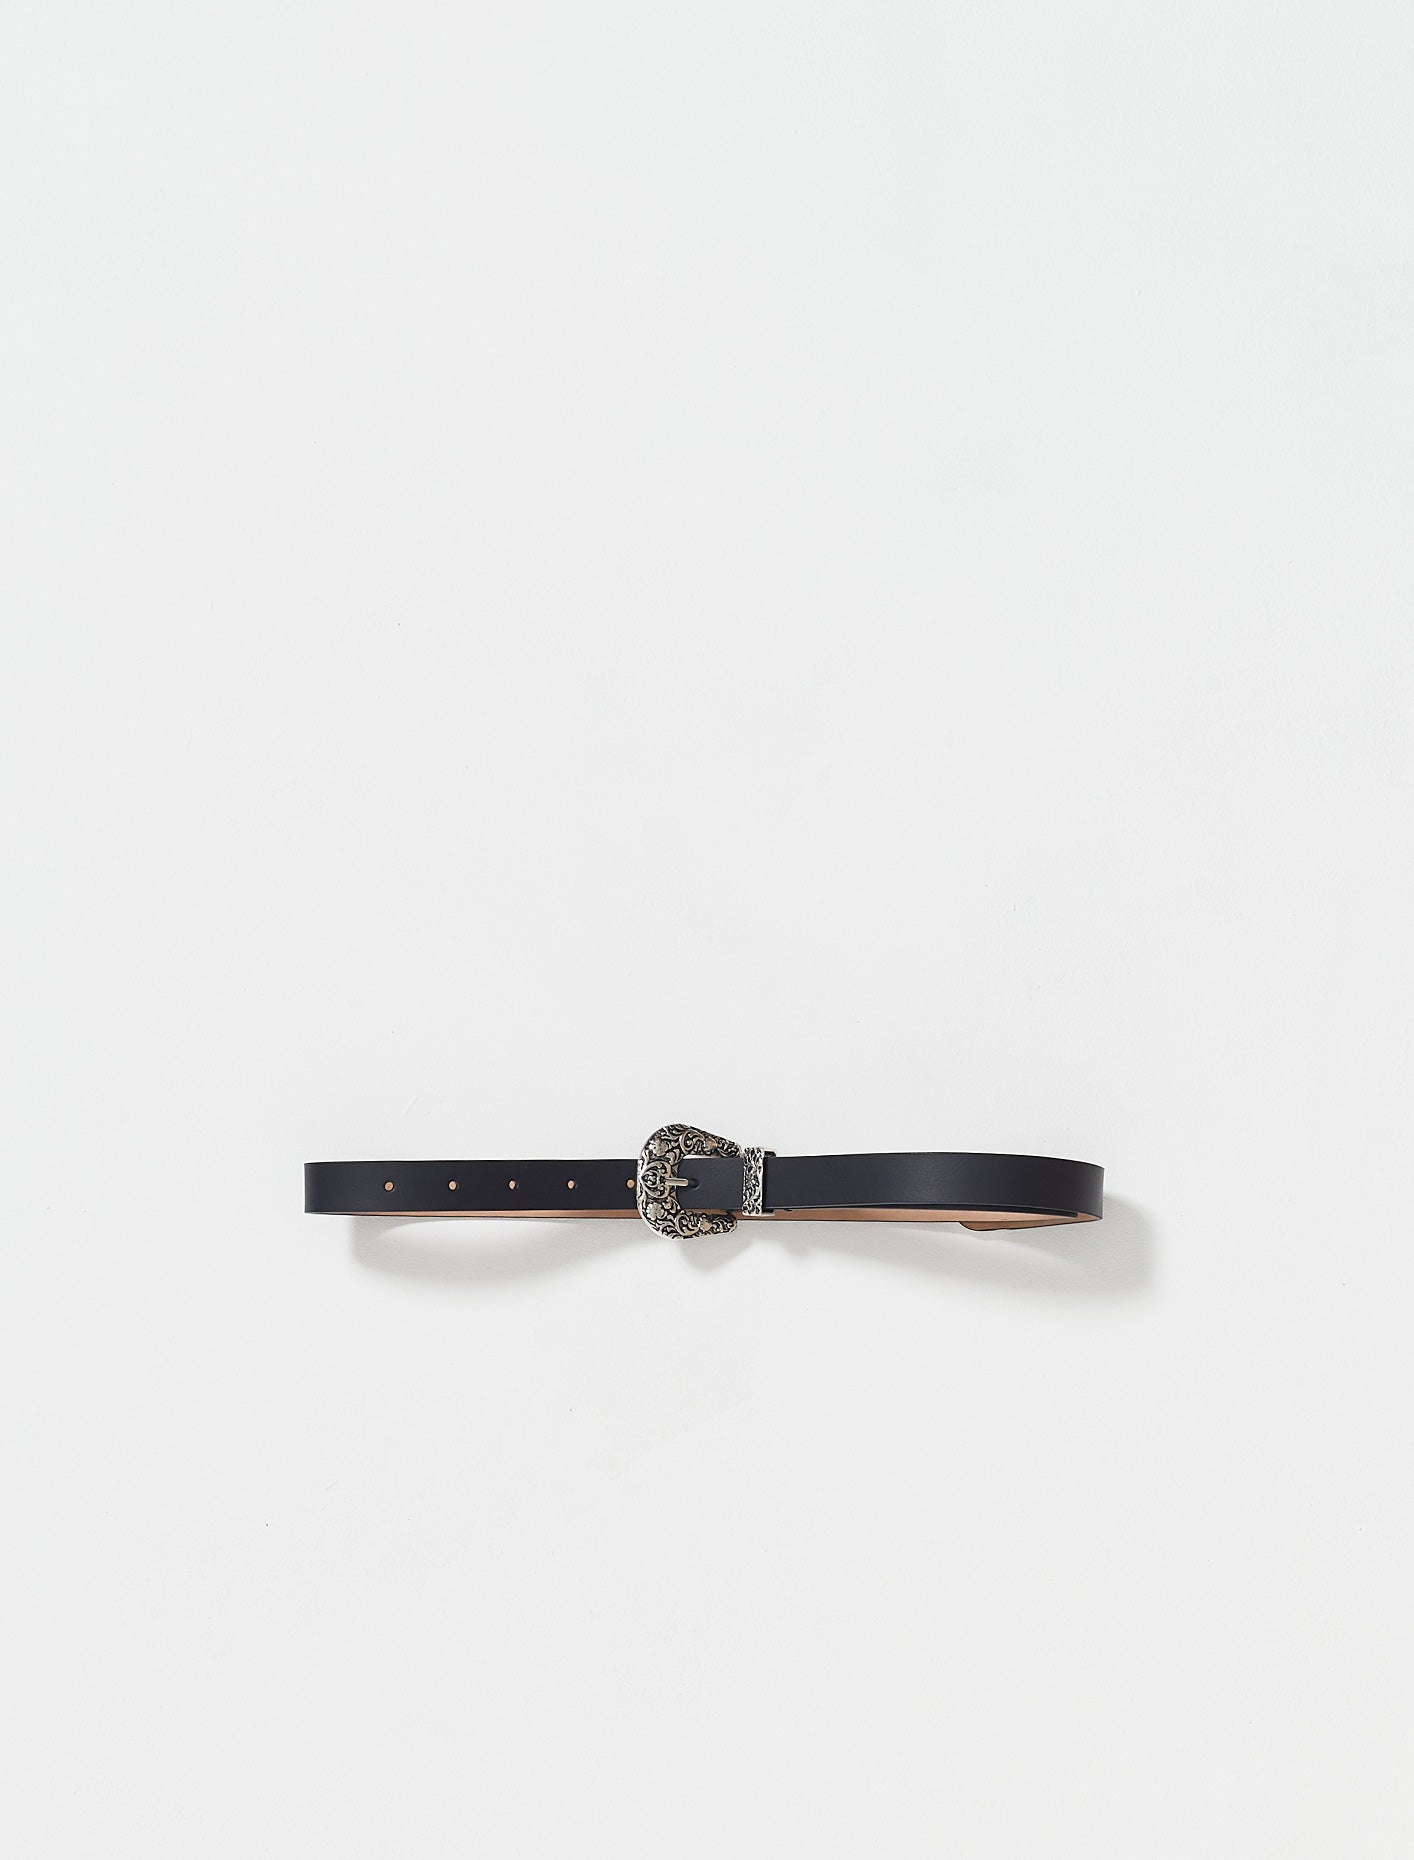 ACNE STUDIOS - LEATHER BELT WITH BLACK ENGRAVED BUCKLE - LE LABO STORE